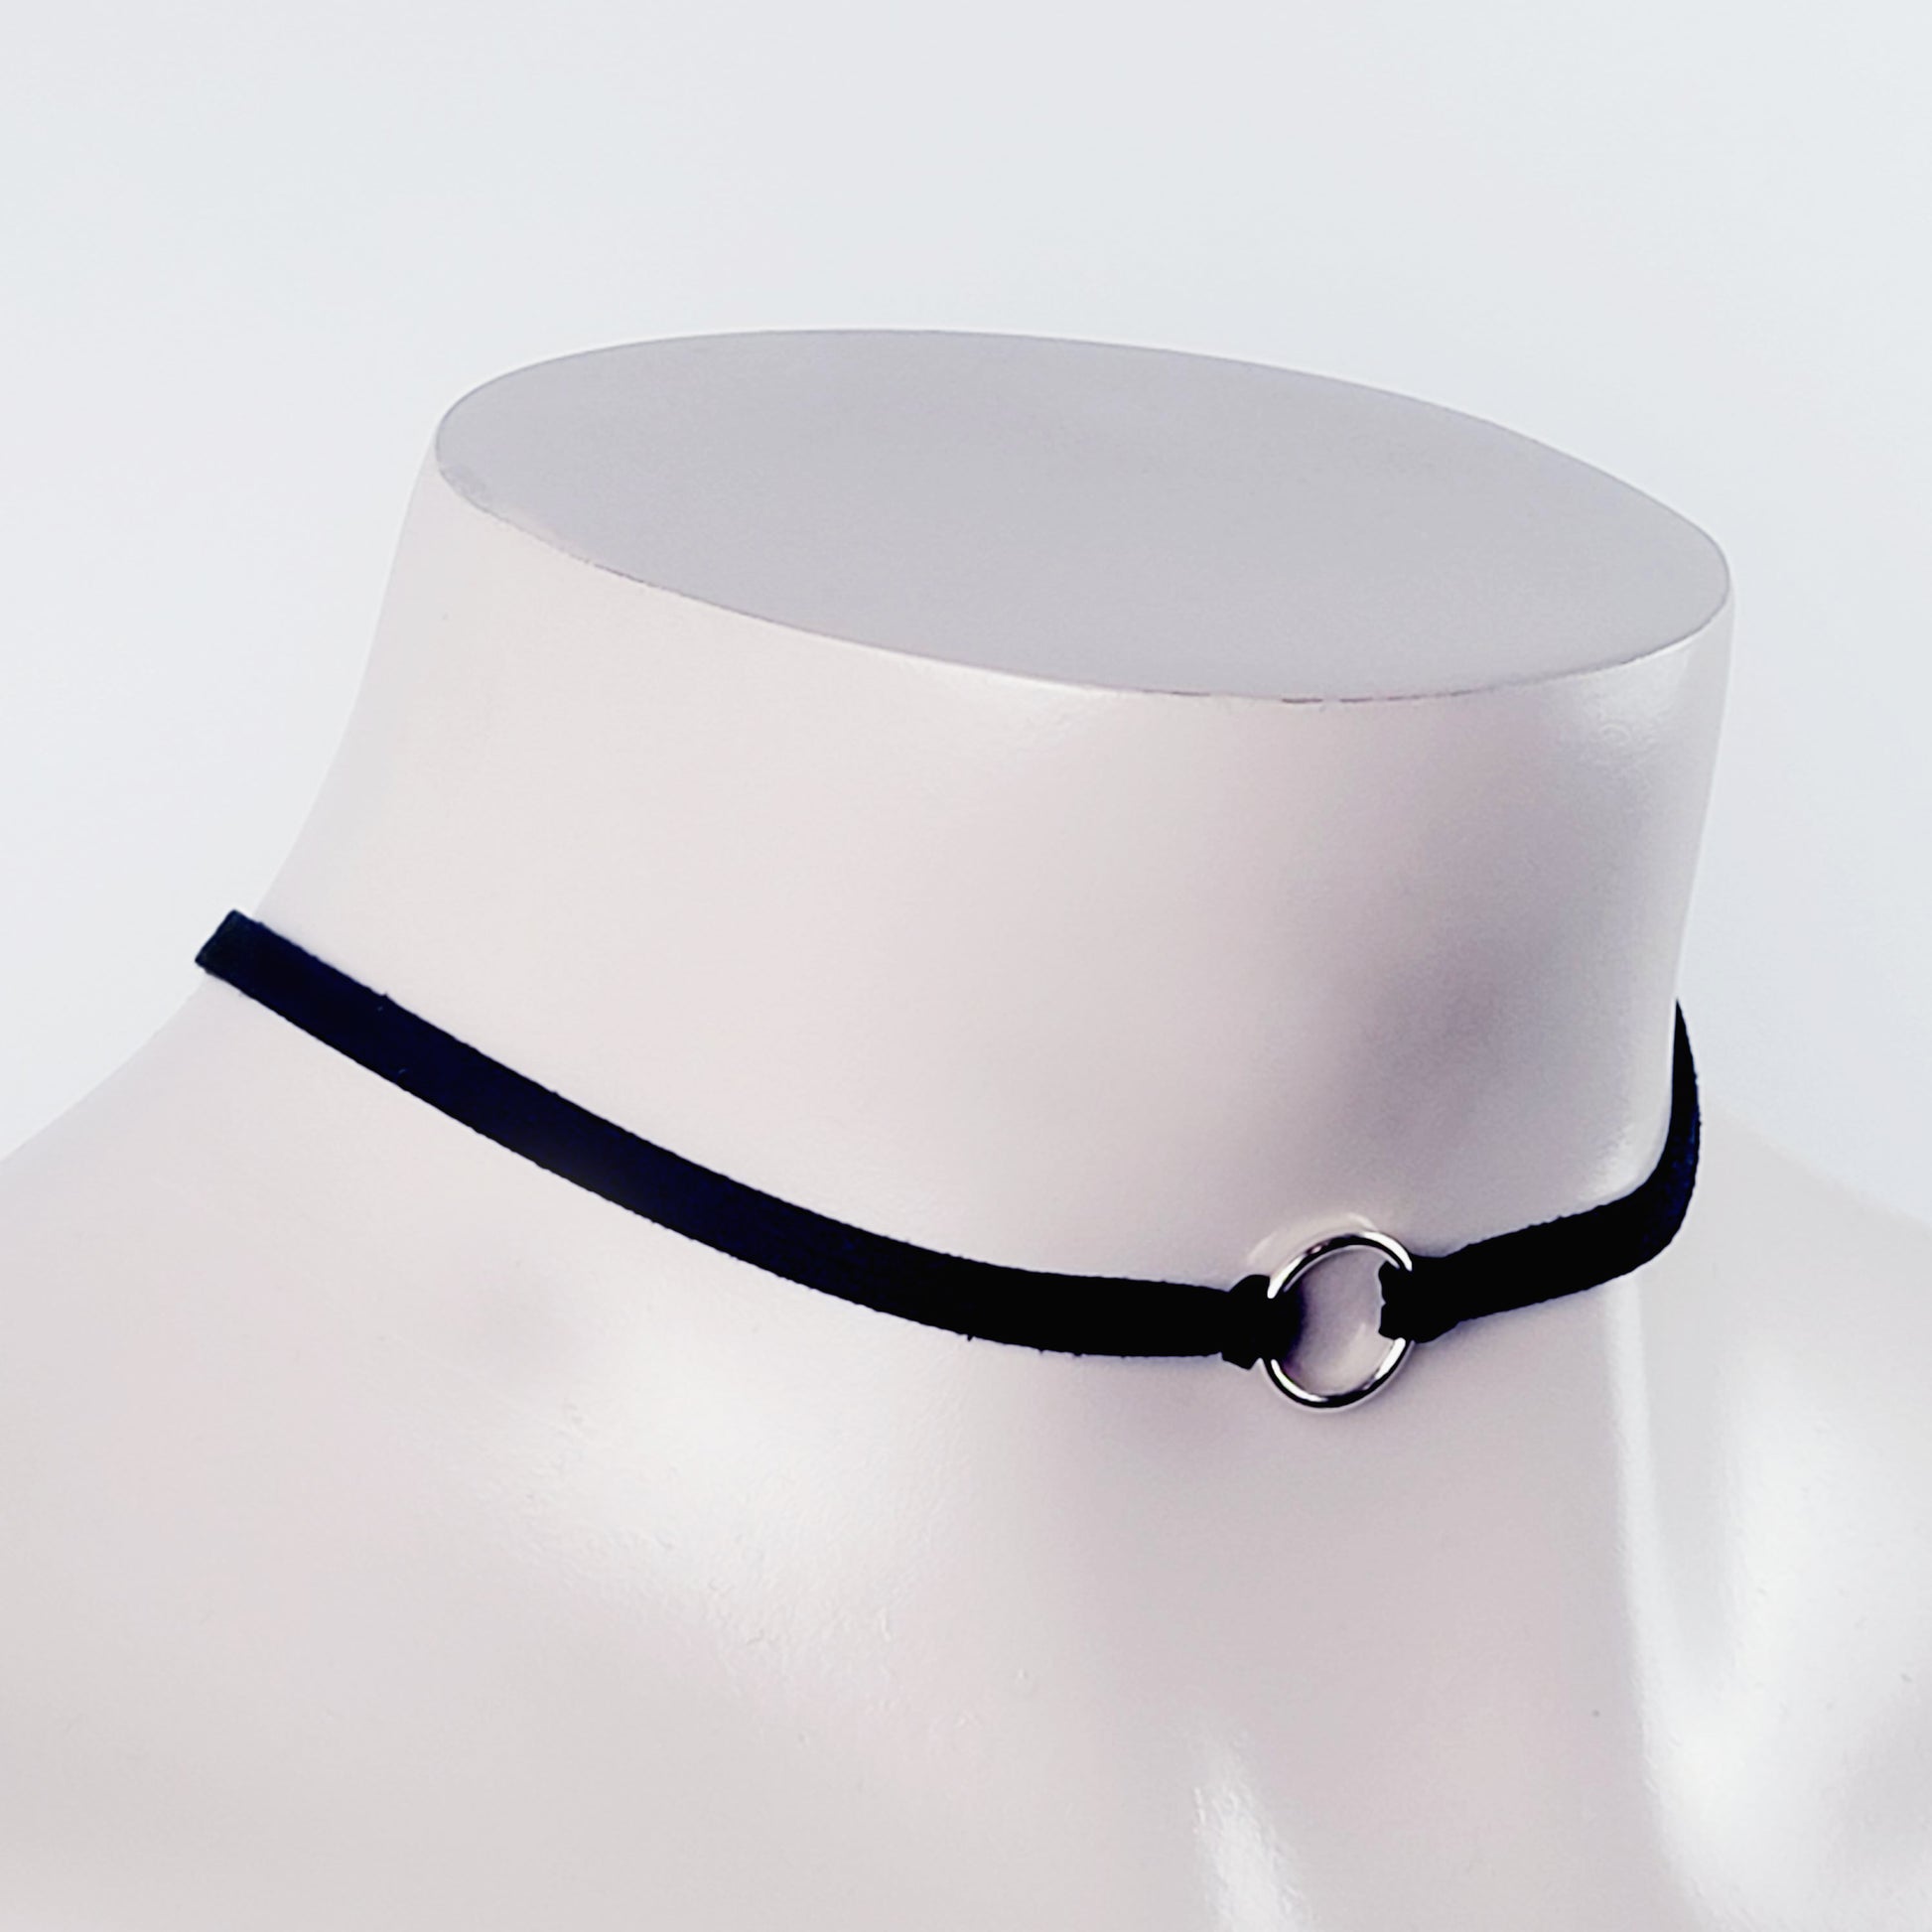 Discreet BDSM Collar ~ Soft leather silver circle choker necklace. Inf –  Why Bee Normal